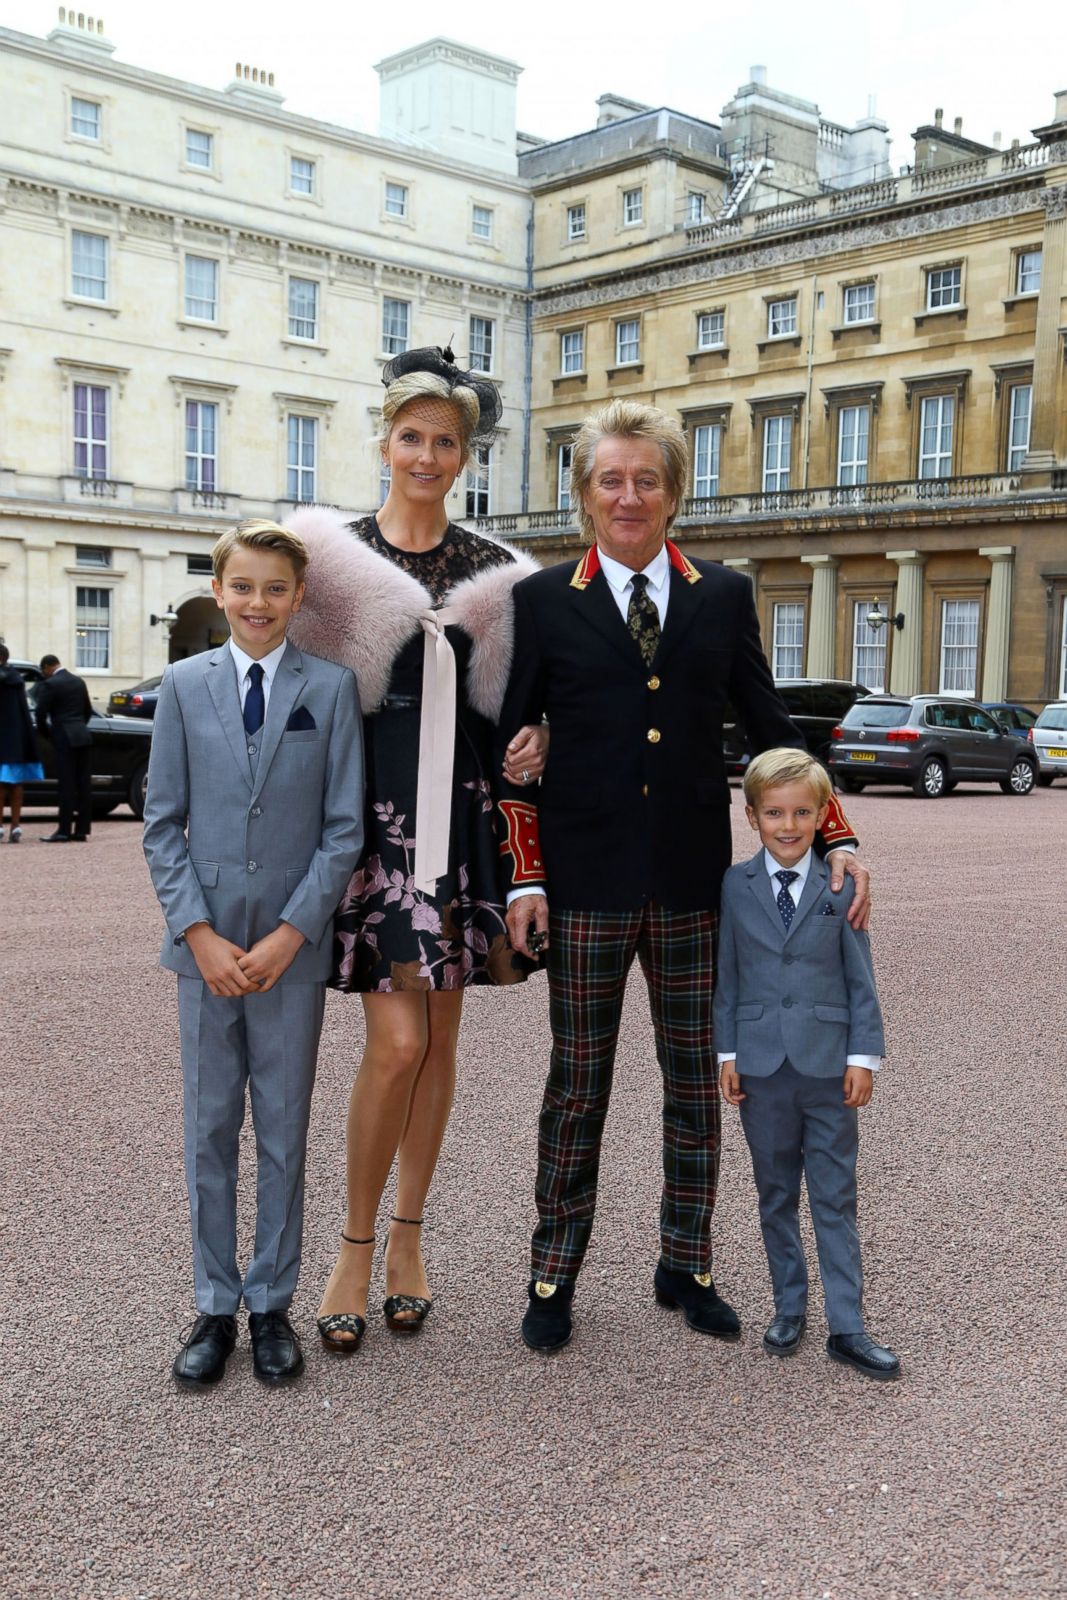 Rod Stewart Takes His Family to His Knghting Picture | Stars with their families - ABC ...